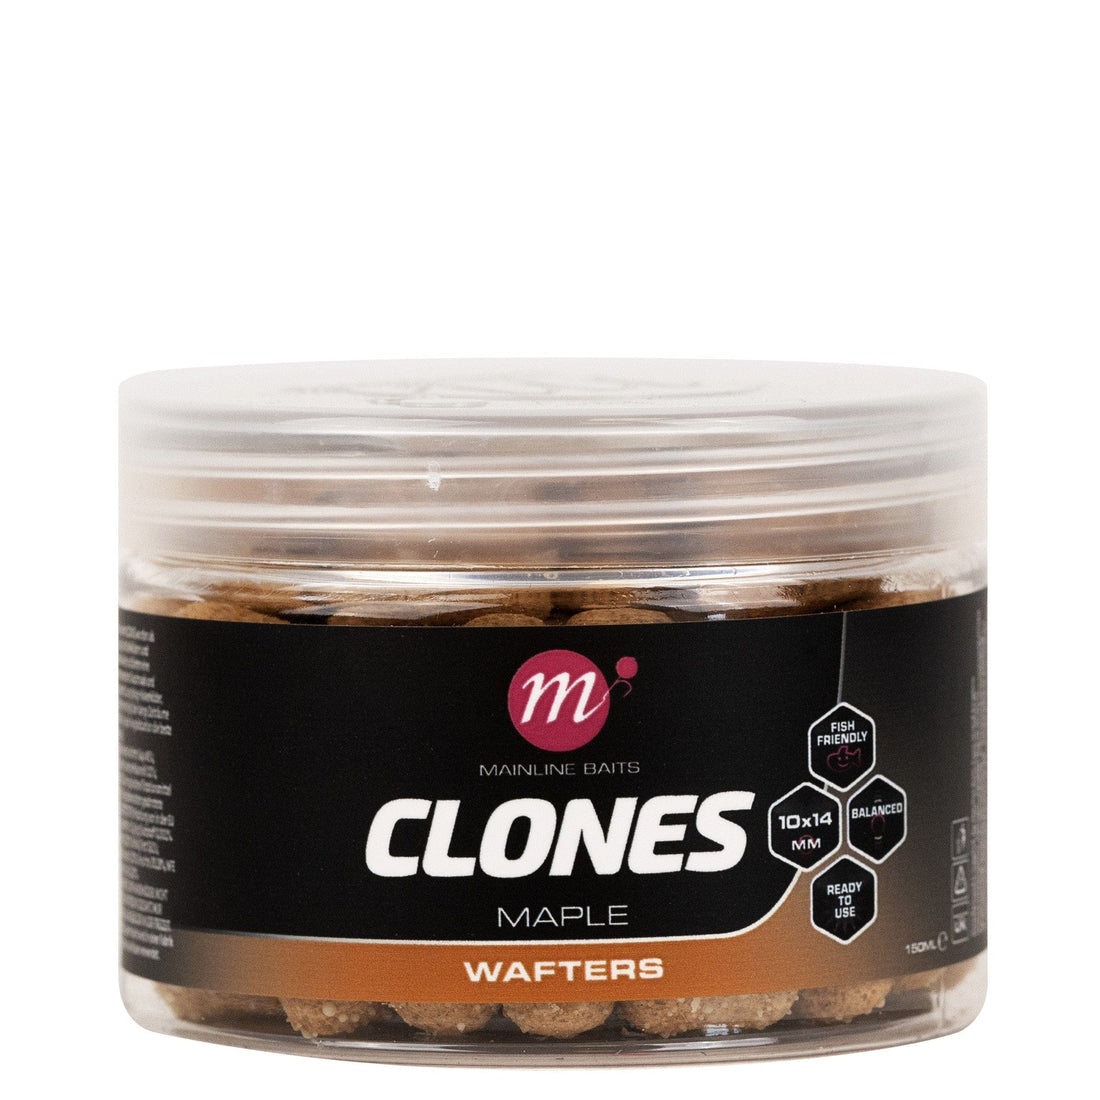 Mainline Clones Barrel Wafters 10x14mm Maple